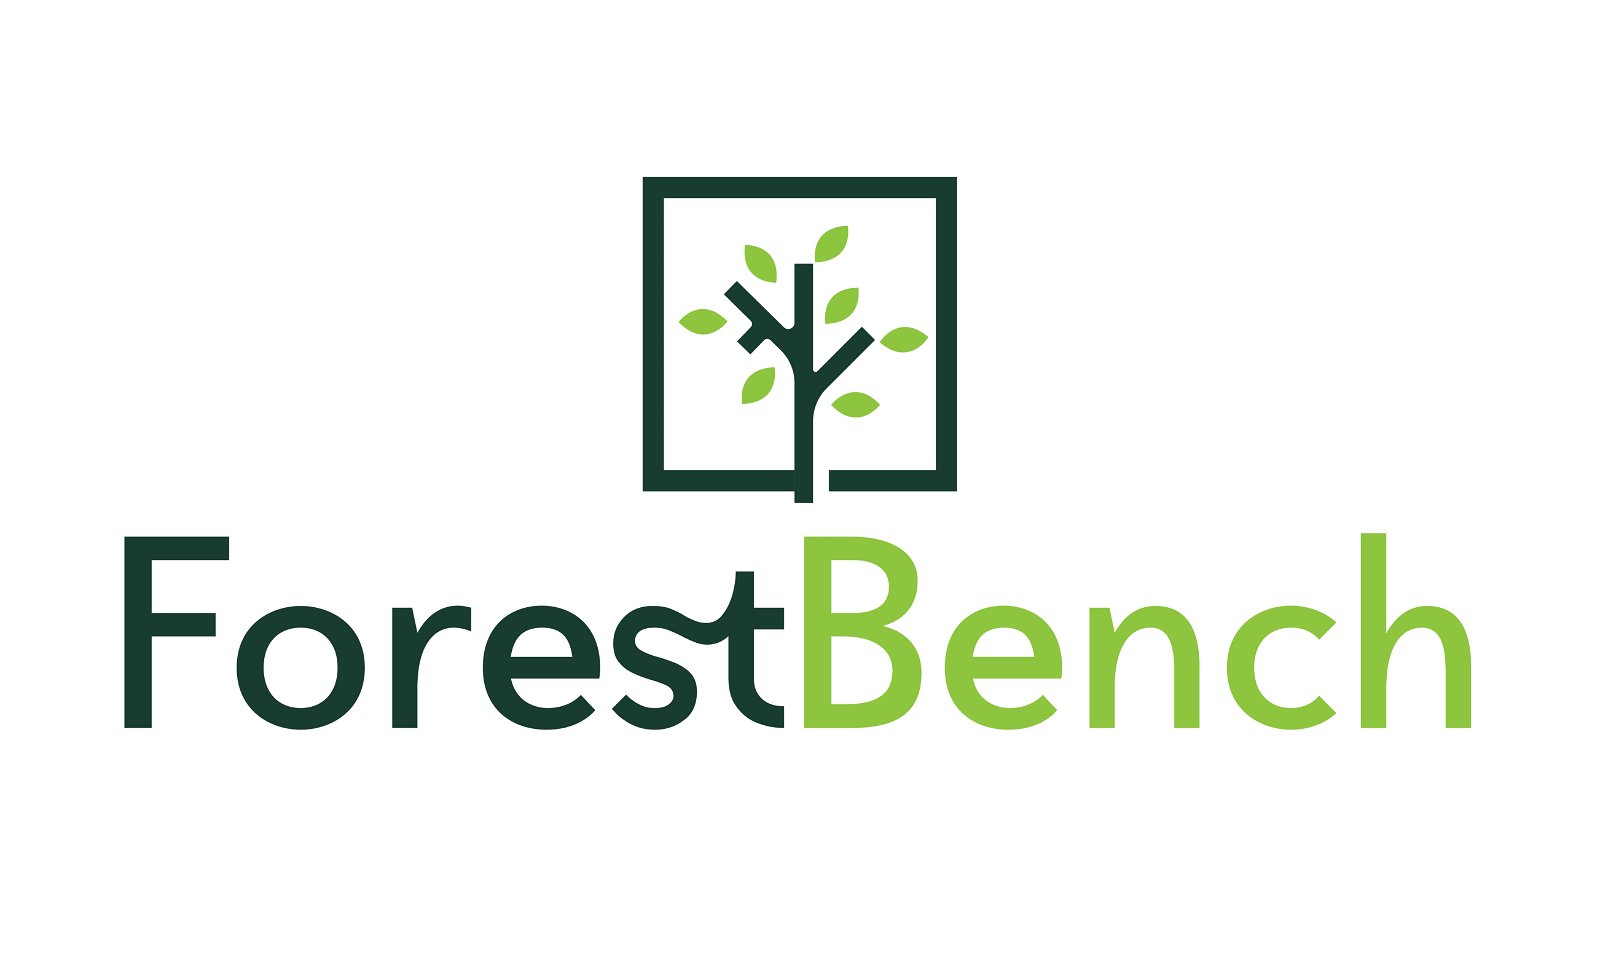 ForestBench.com - Creative brandable domain for sale